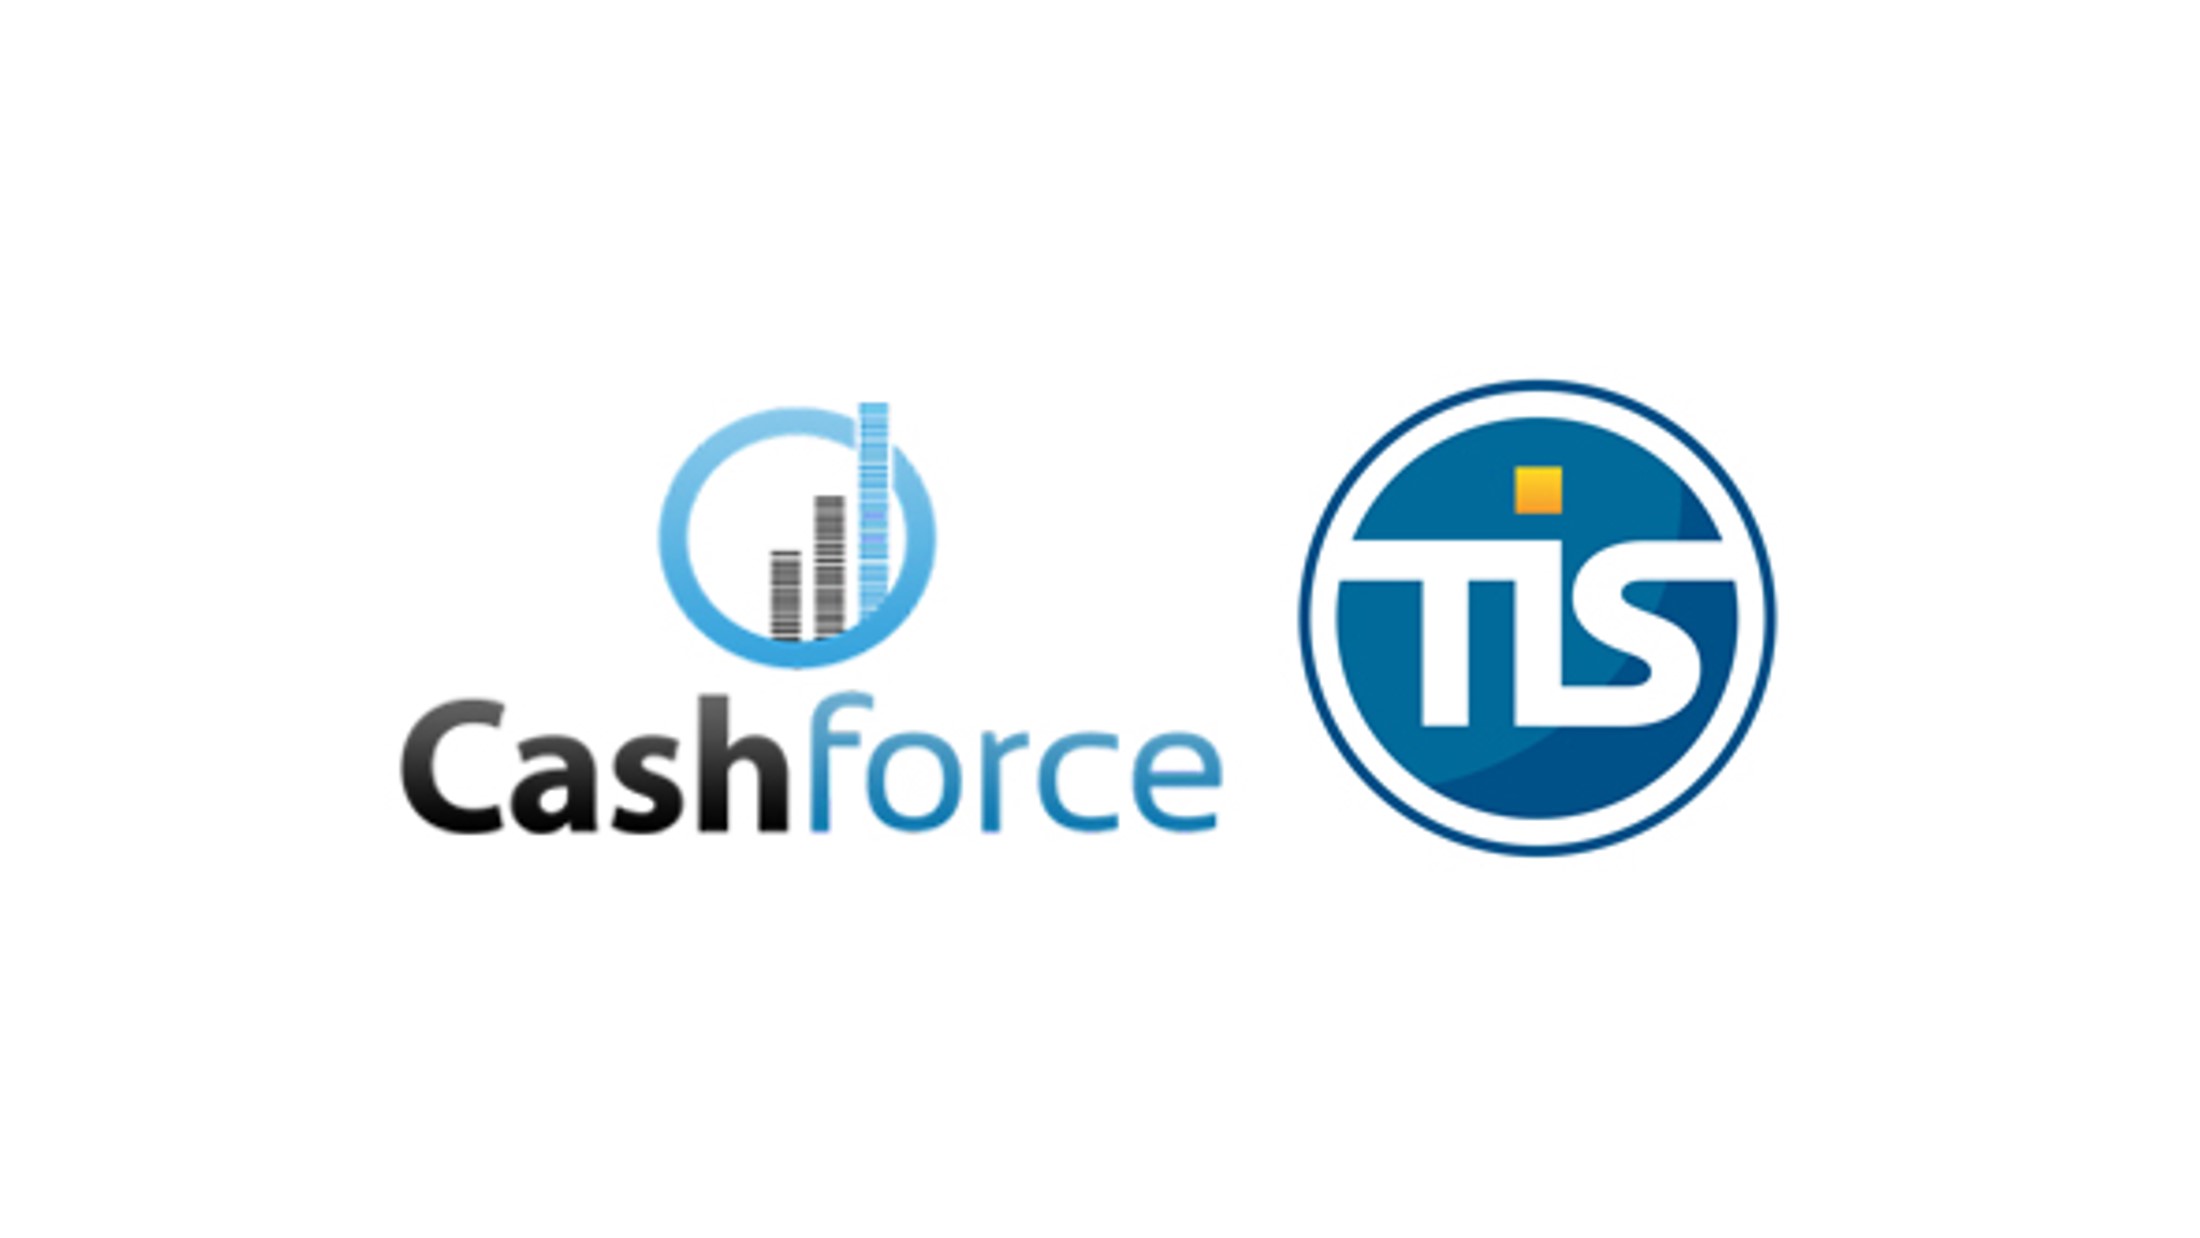 Enterprise Payment Leader TIS Acquires Cashforce to Revolutionize Global Liquidity Management for Treasury and Finance Teams | Inkef